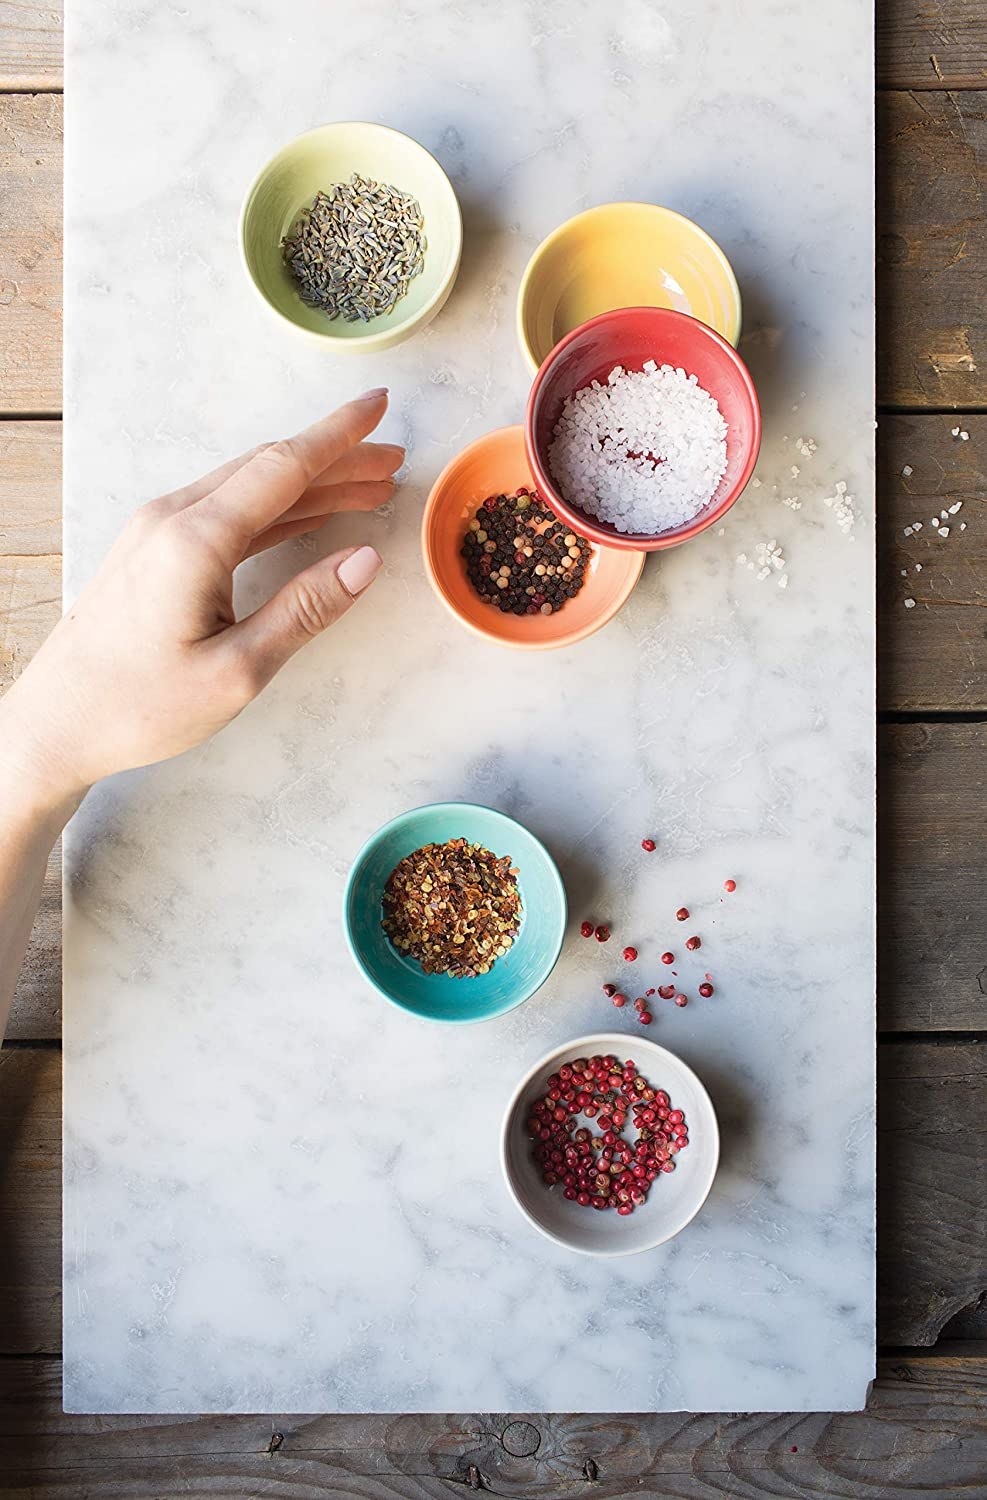 Six ceramic pinch bowls on a table filled with different ingredients